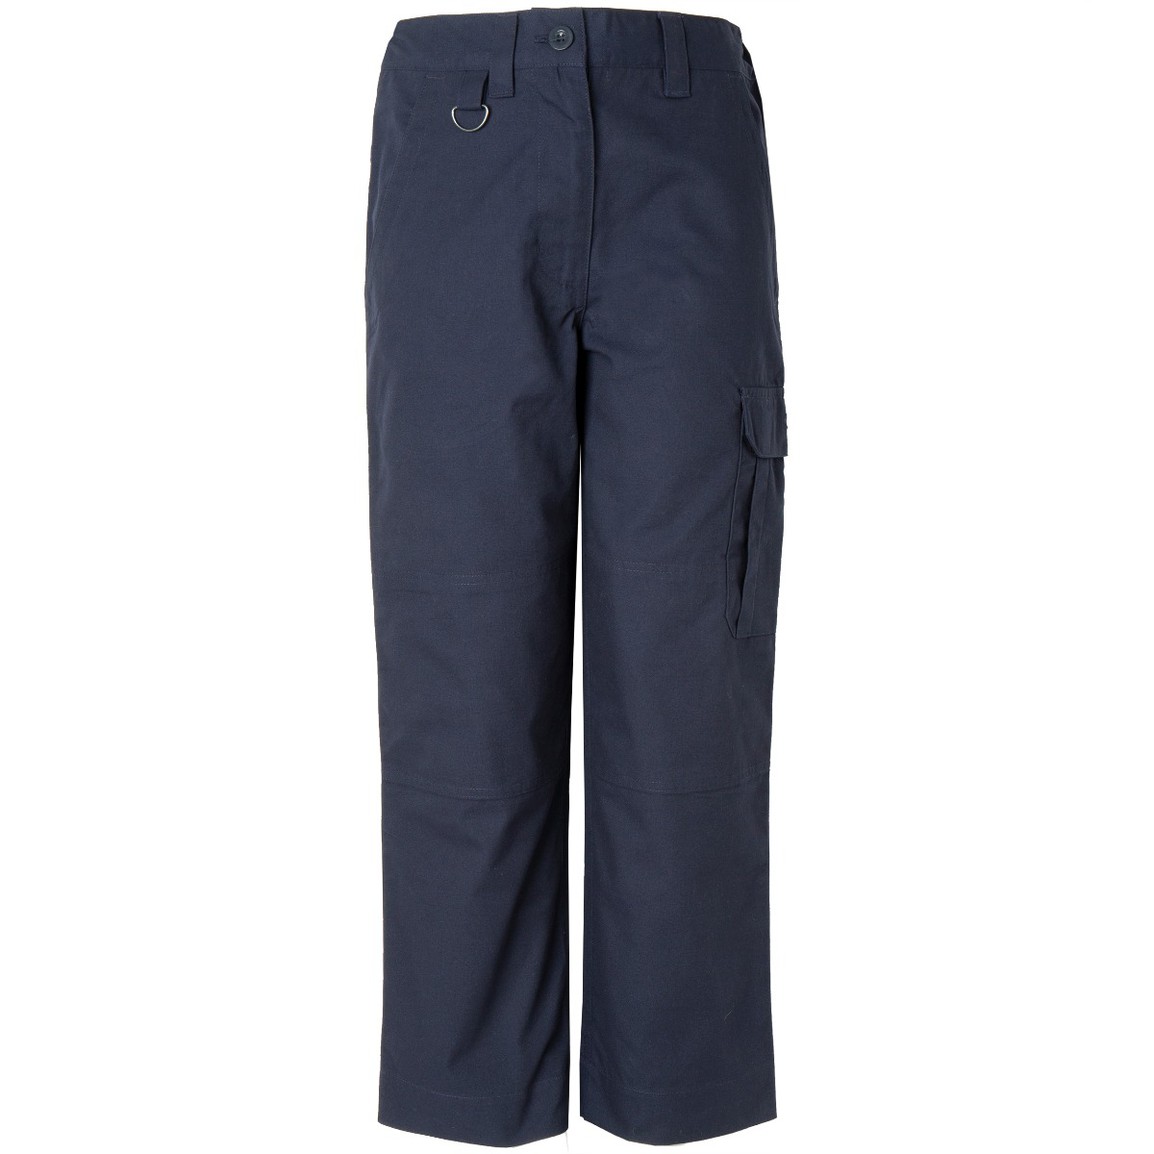 Official Girls Scouting Activity Trousers - Cubs and Scouts Scouts Sections